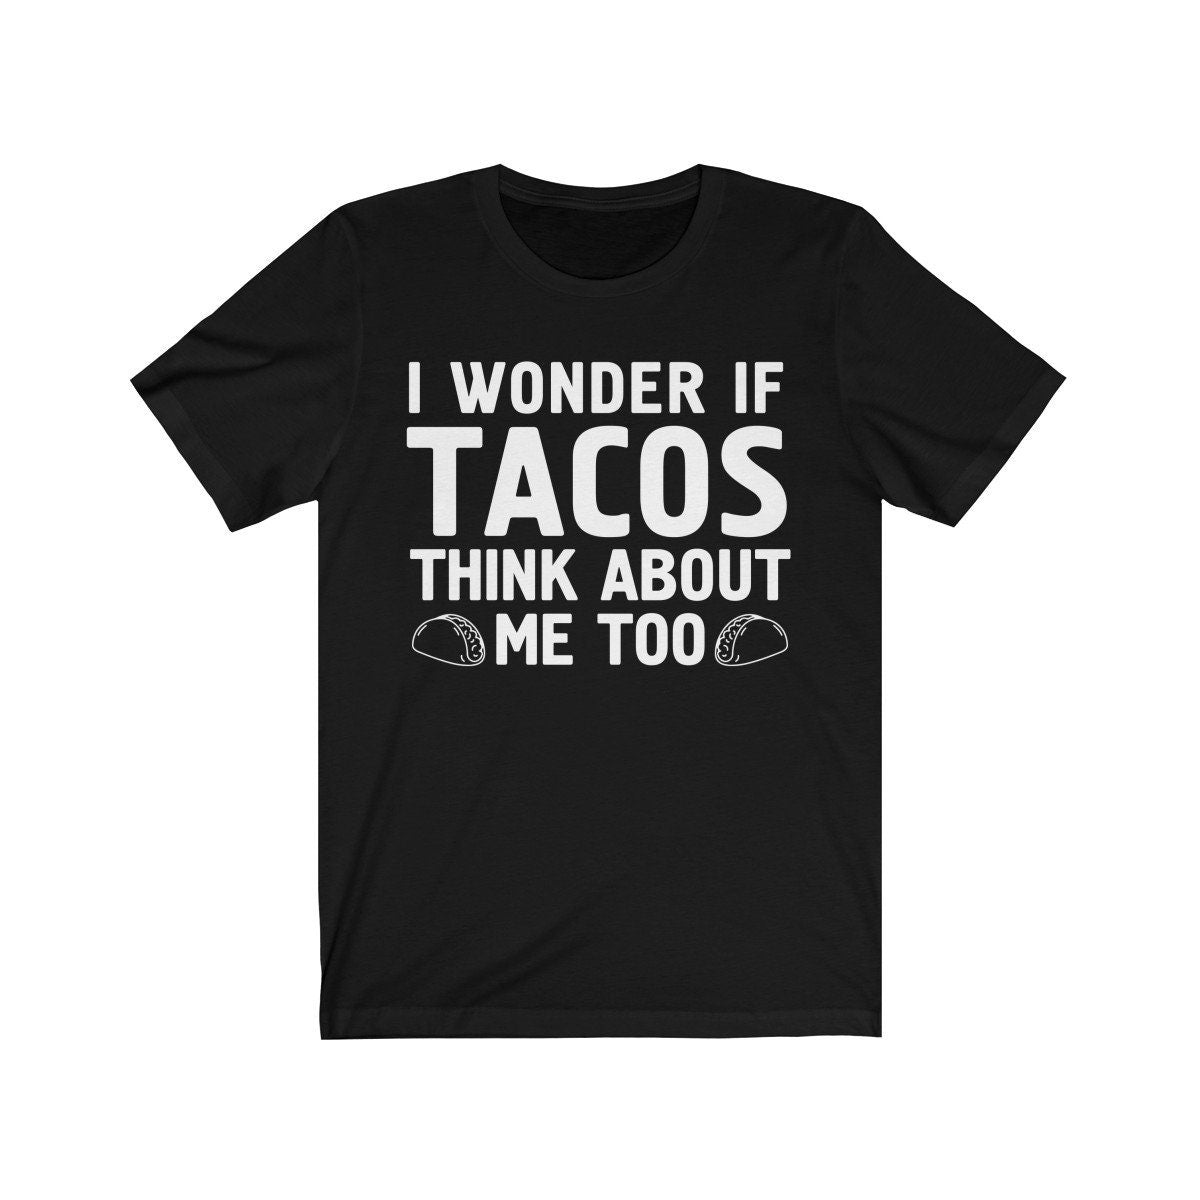 I Wonder if Tacos think about me too Gift t-shirt for Women Men